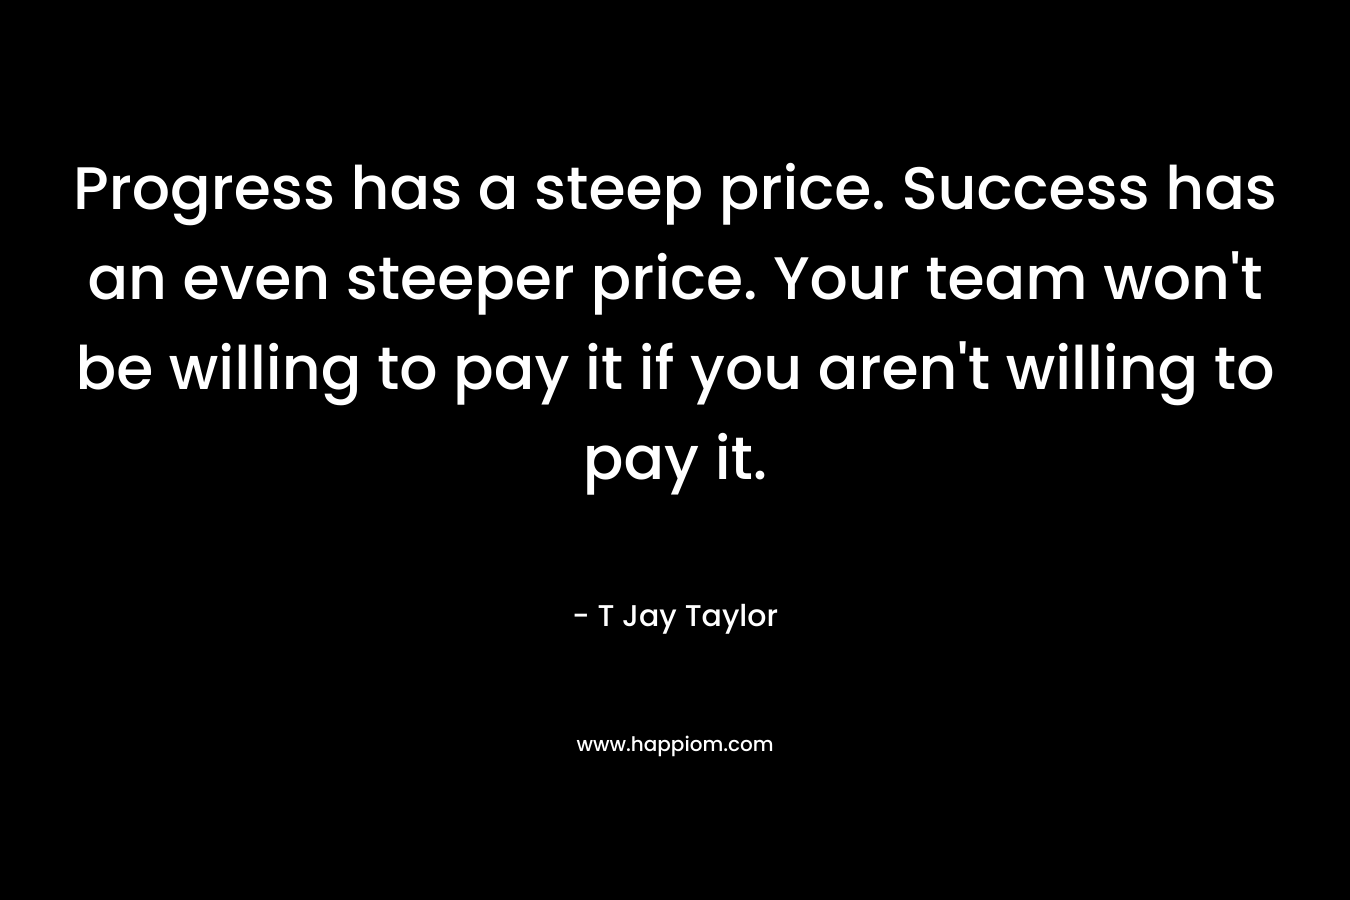 Progress has a steep price. Success has an even steeper price. Your team won't be willing to pay it if you aren't willing to pay it.